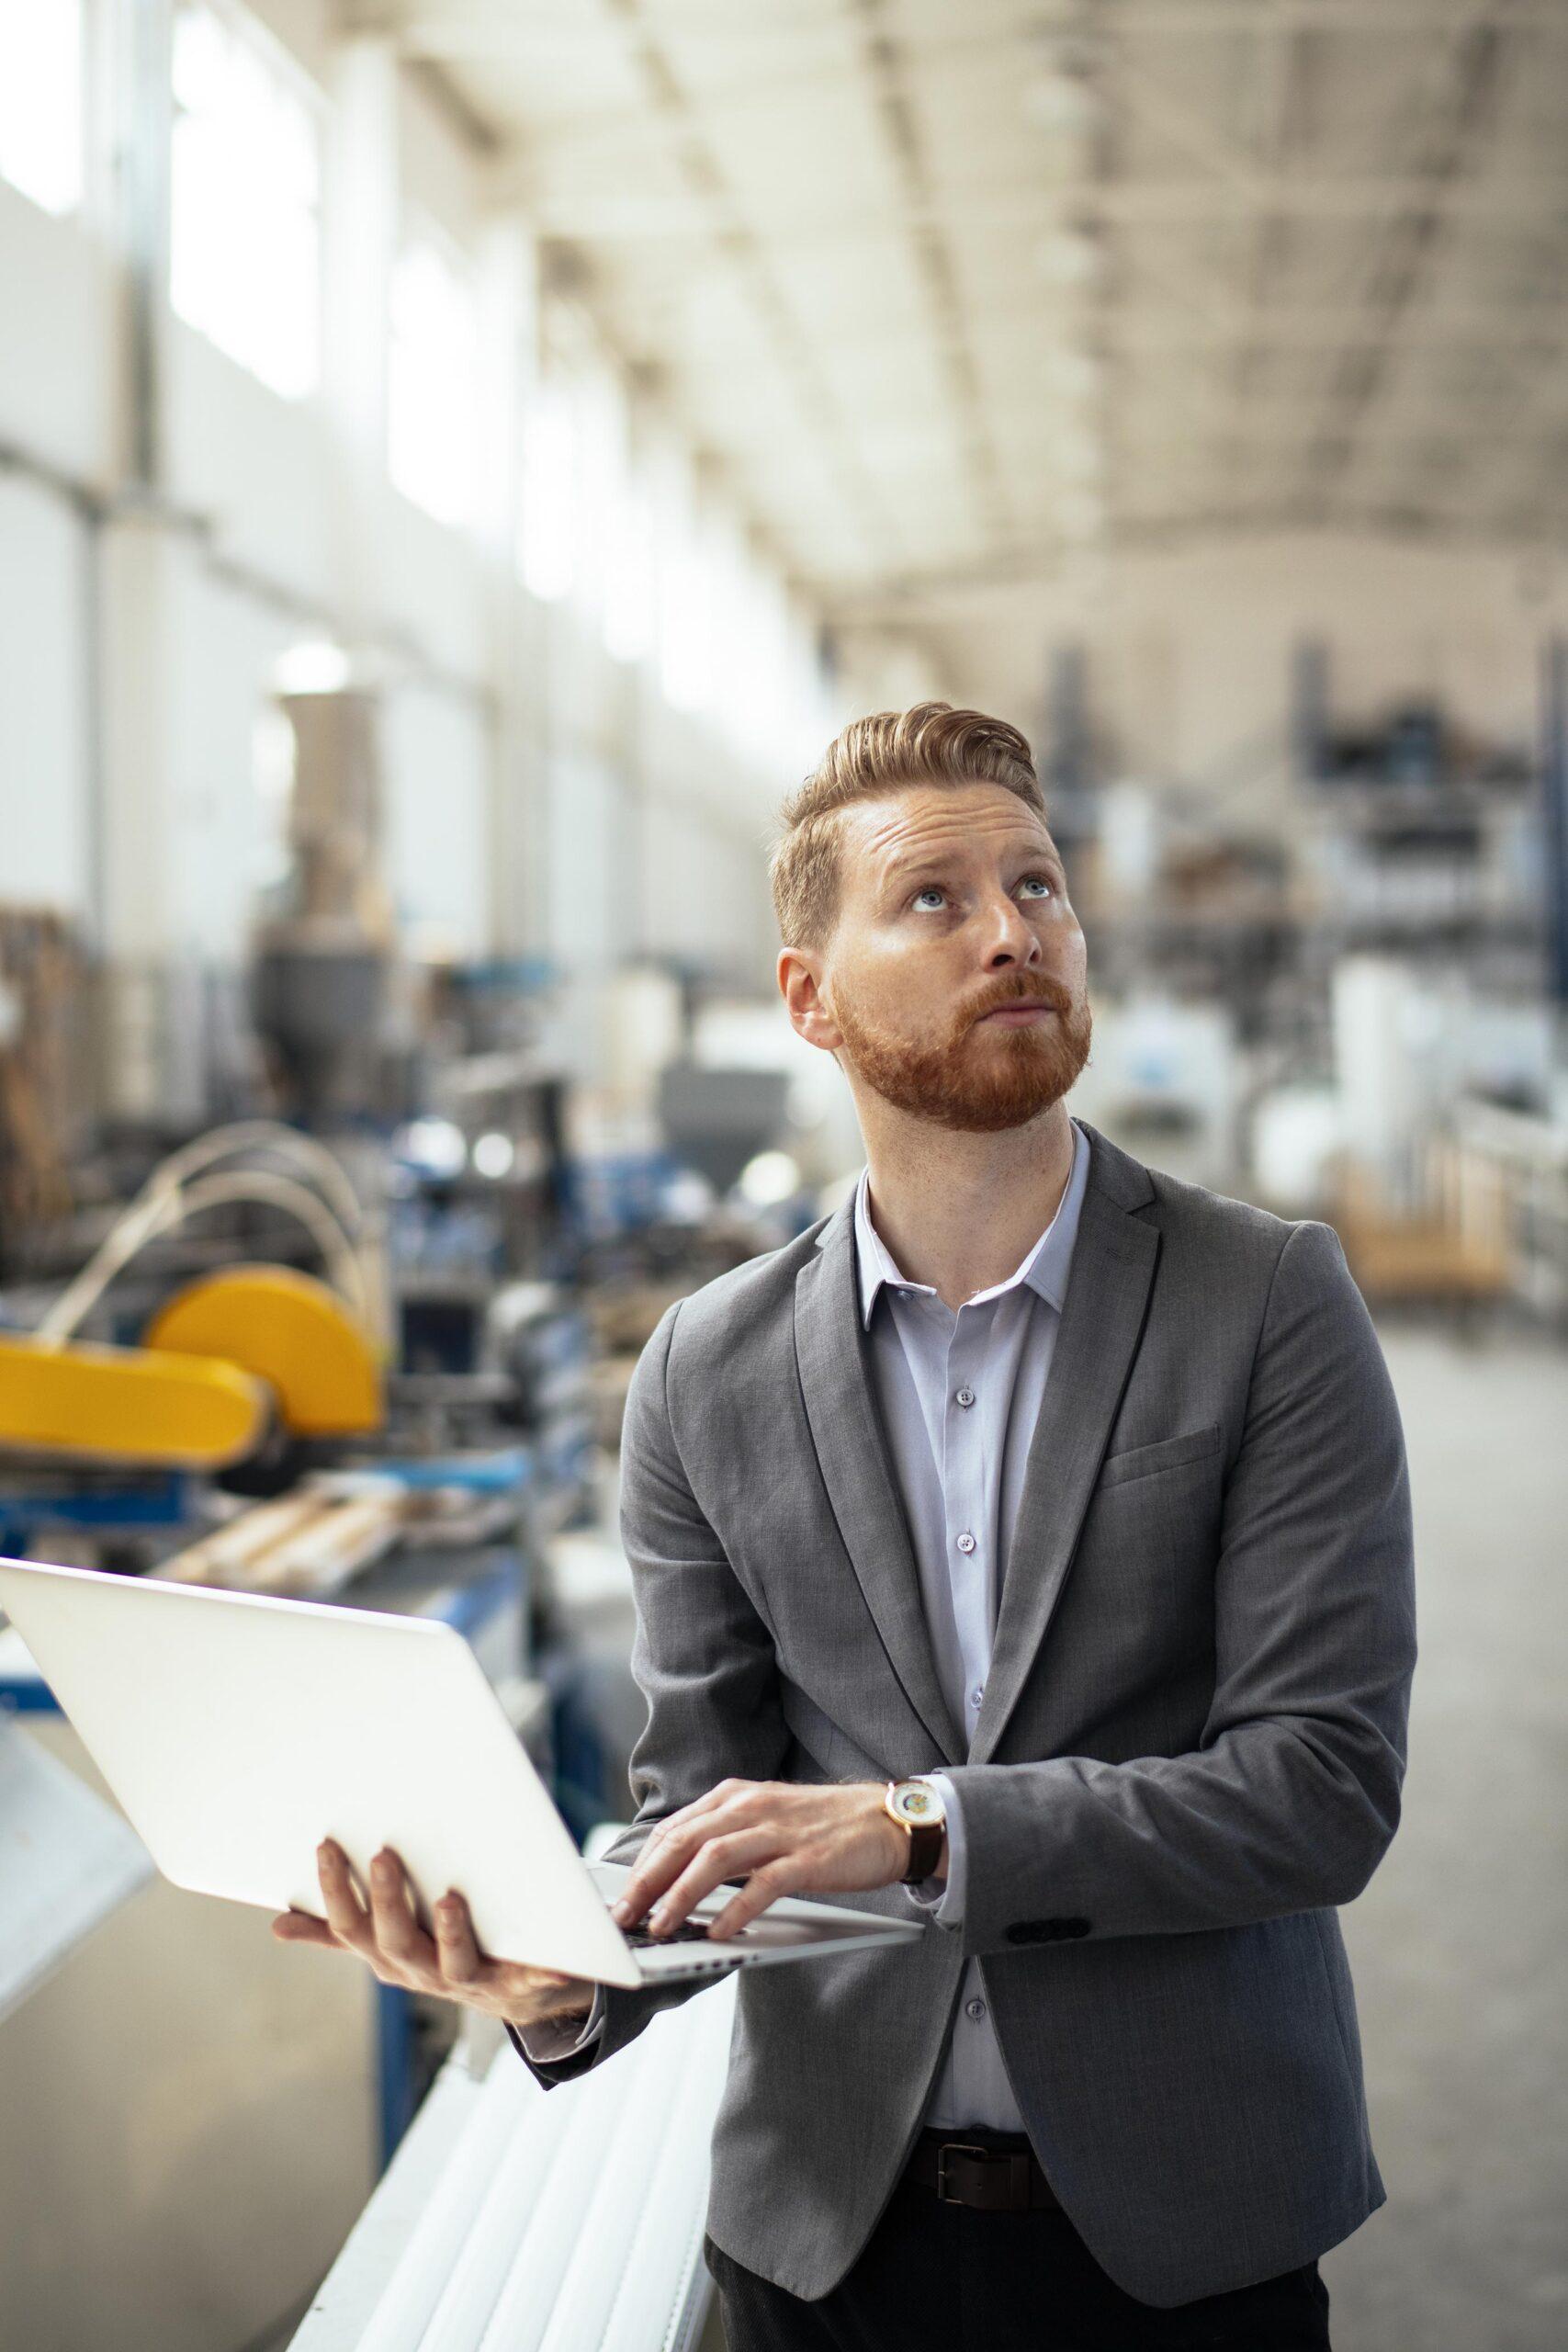 IT engineer holding laptop and examining factory floor